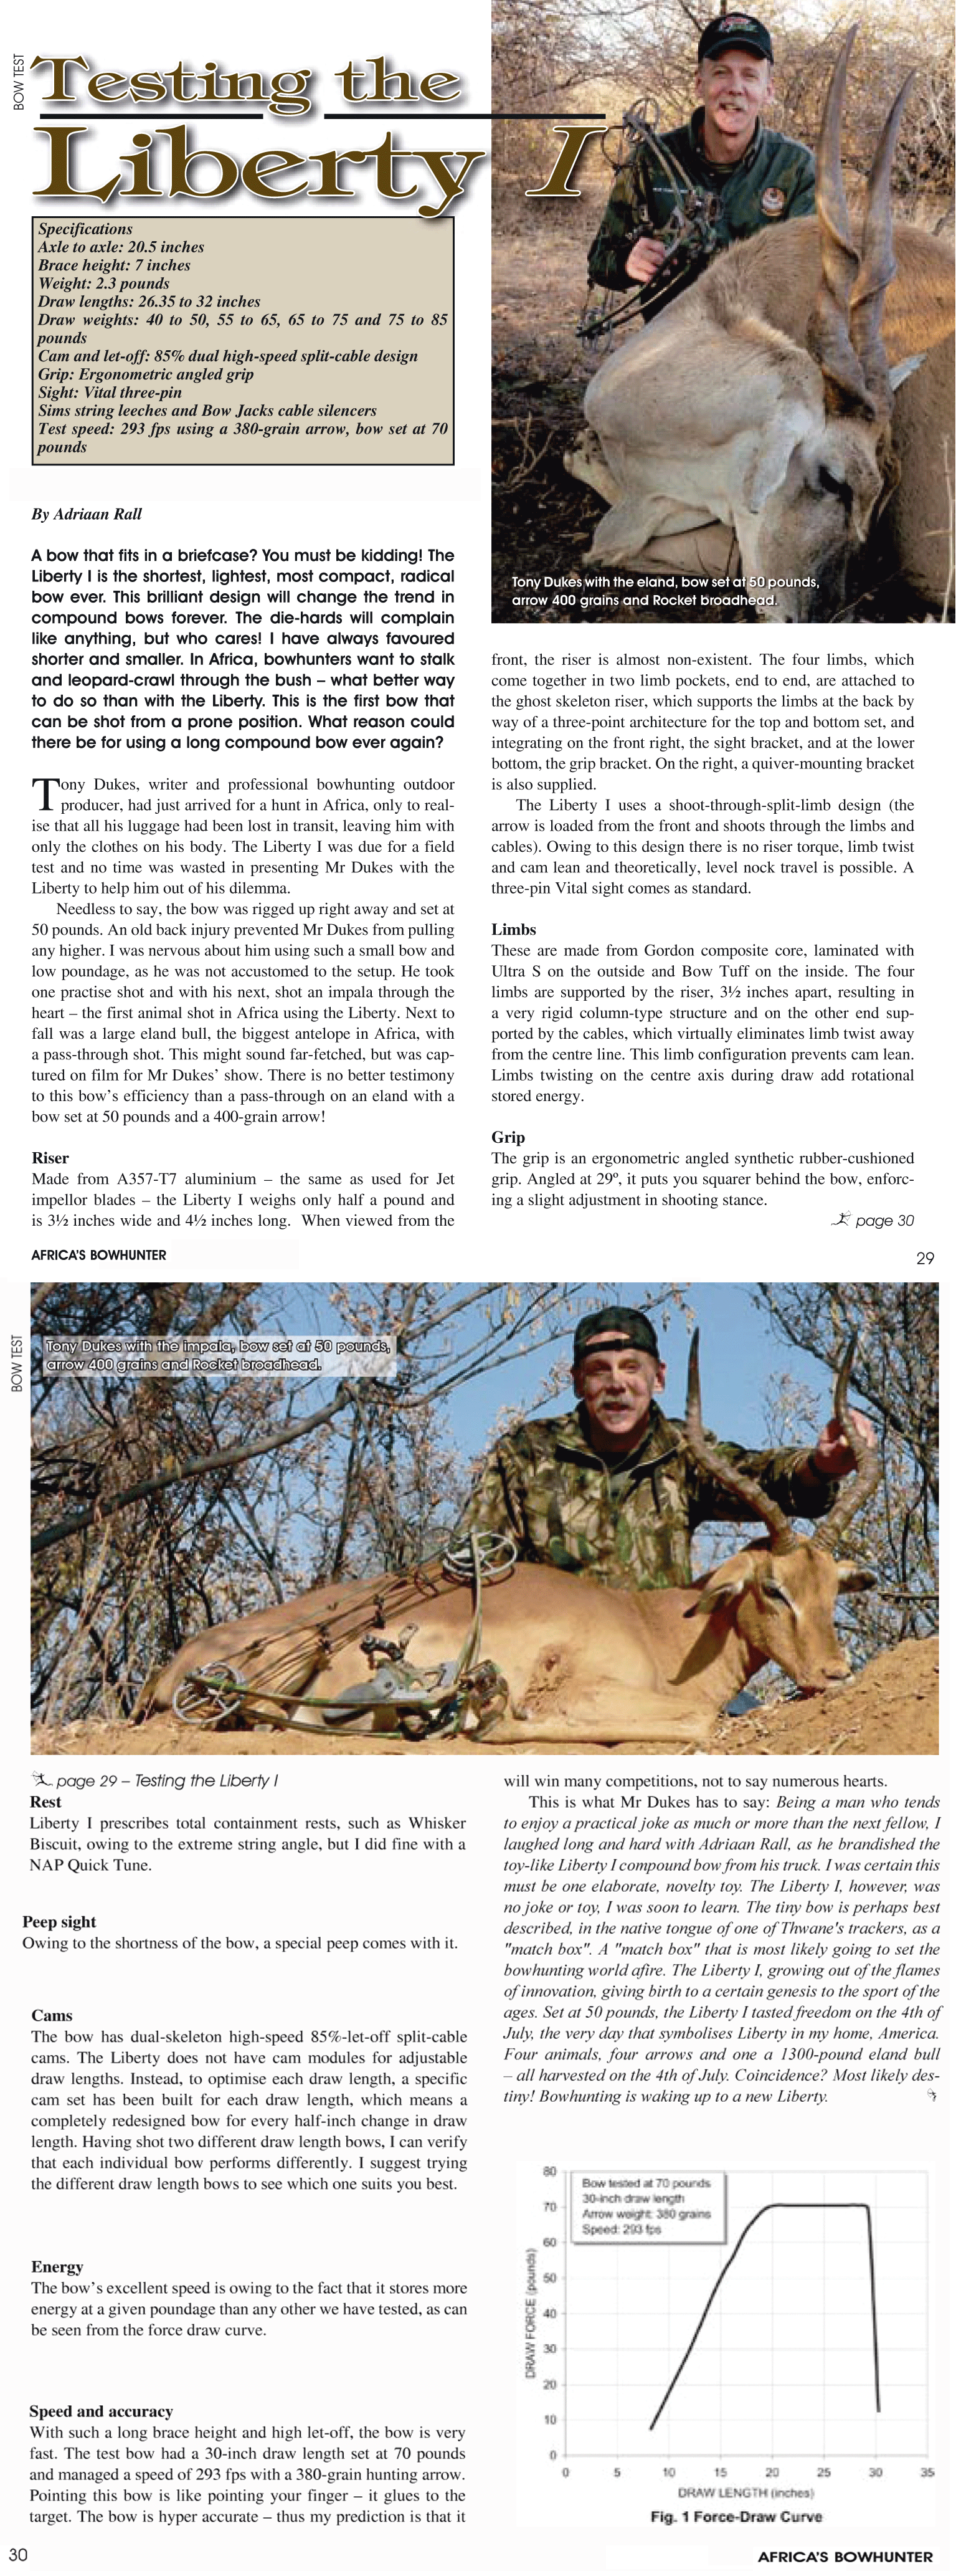 Africas Bowhunter magizine review of Liberty Archery compound bow.